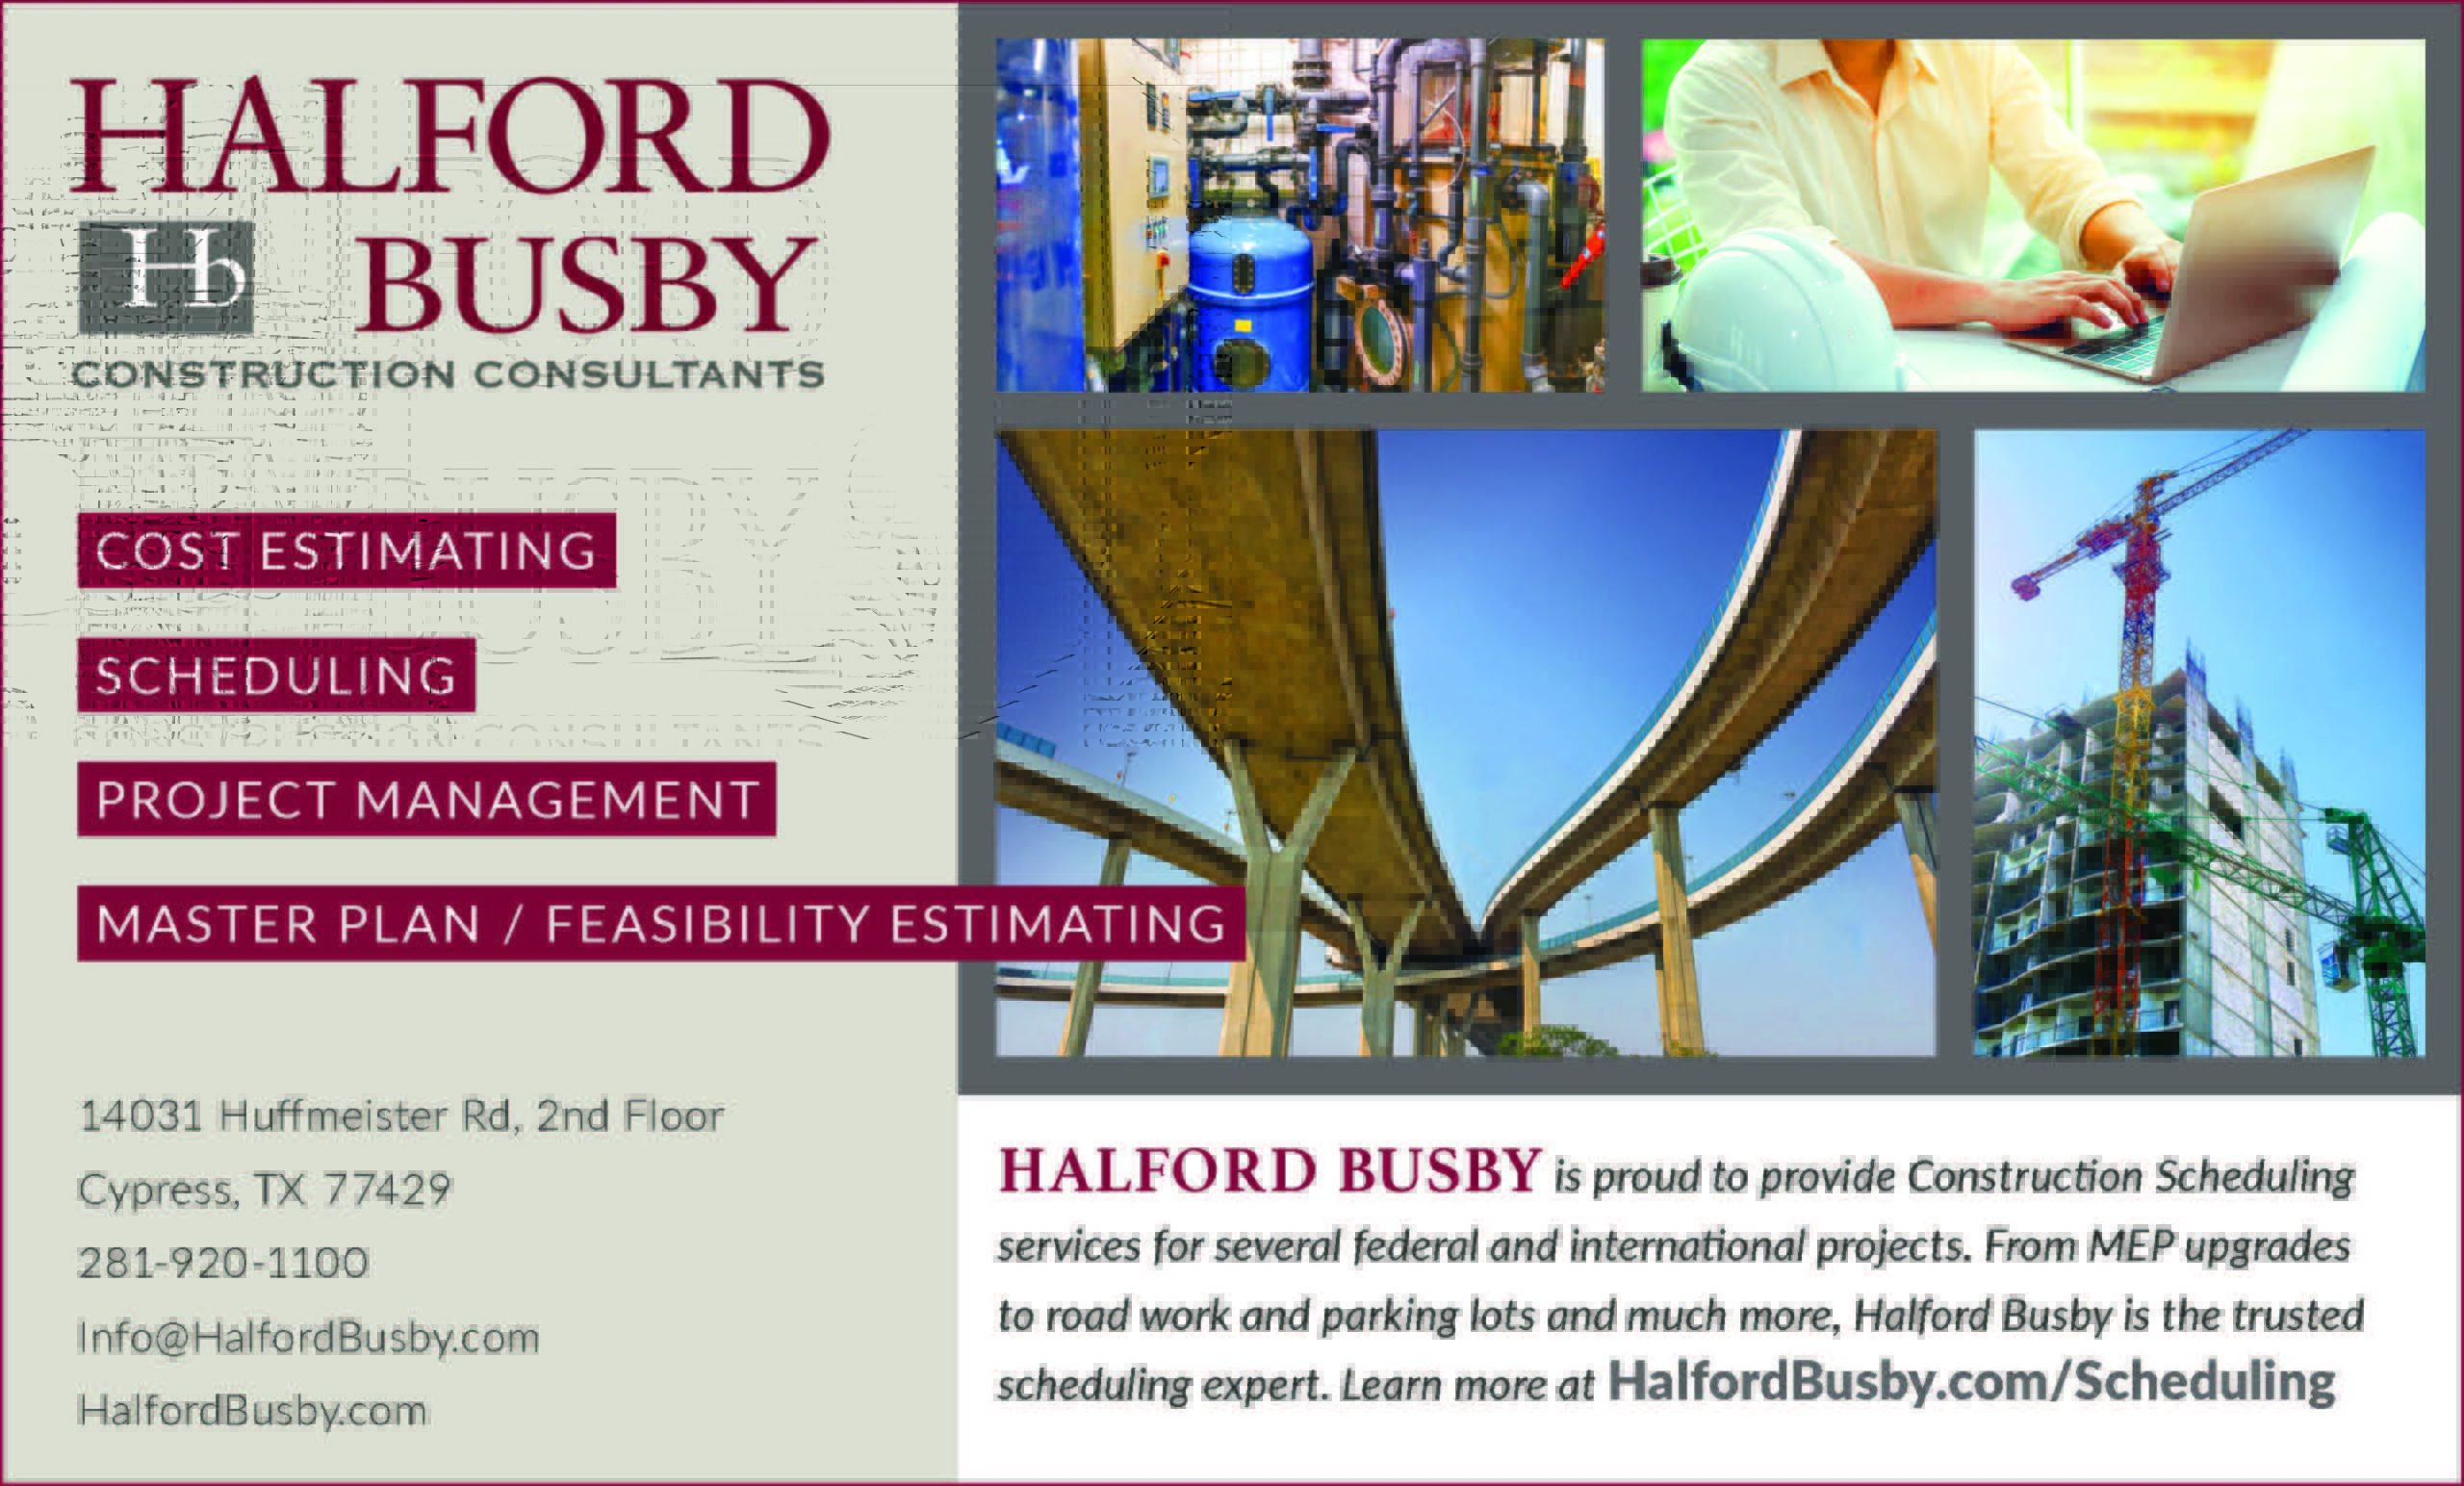 Halford Busby provides construction scheduling services